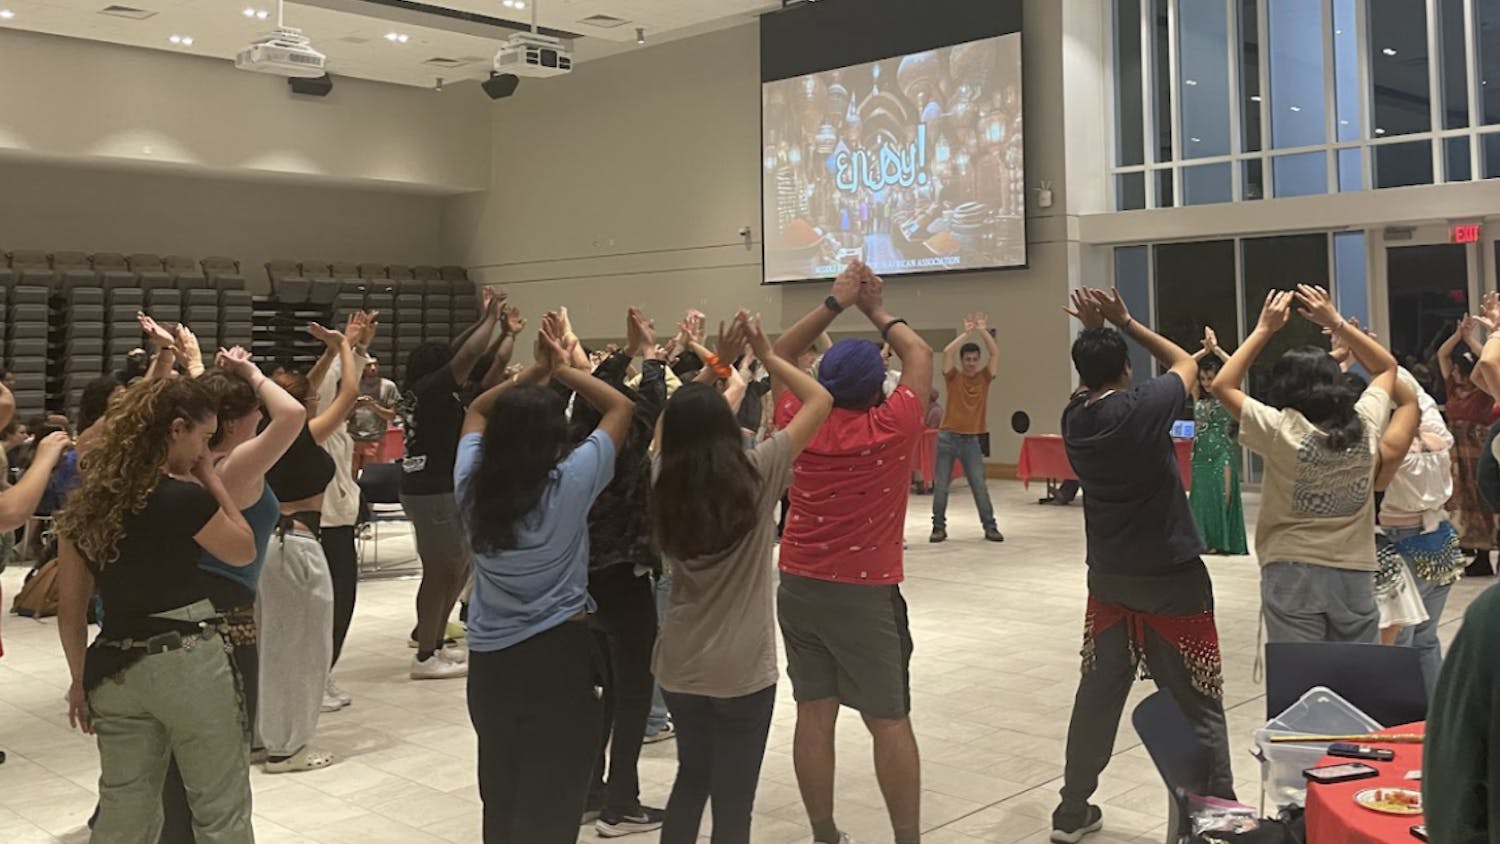 Students participating in interactive belly dance performance (Photo courtesy of Parisa Burton).